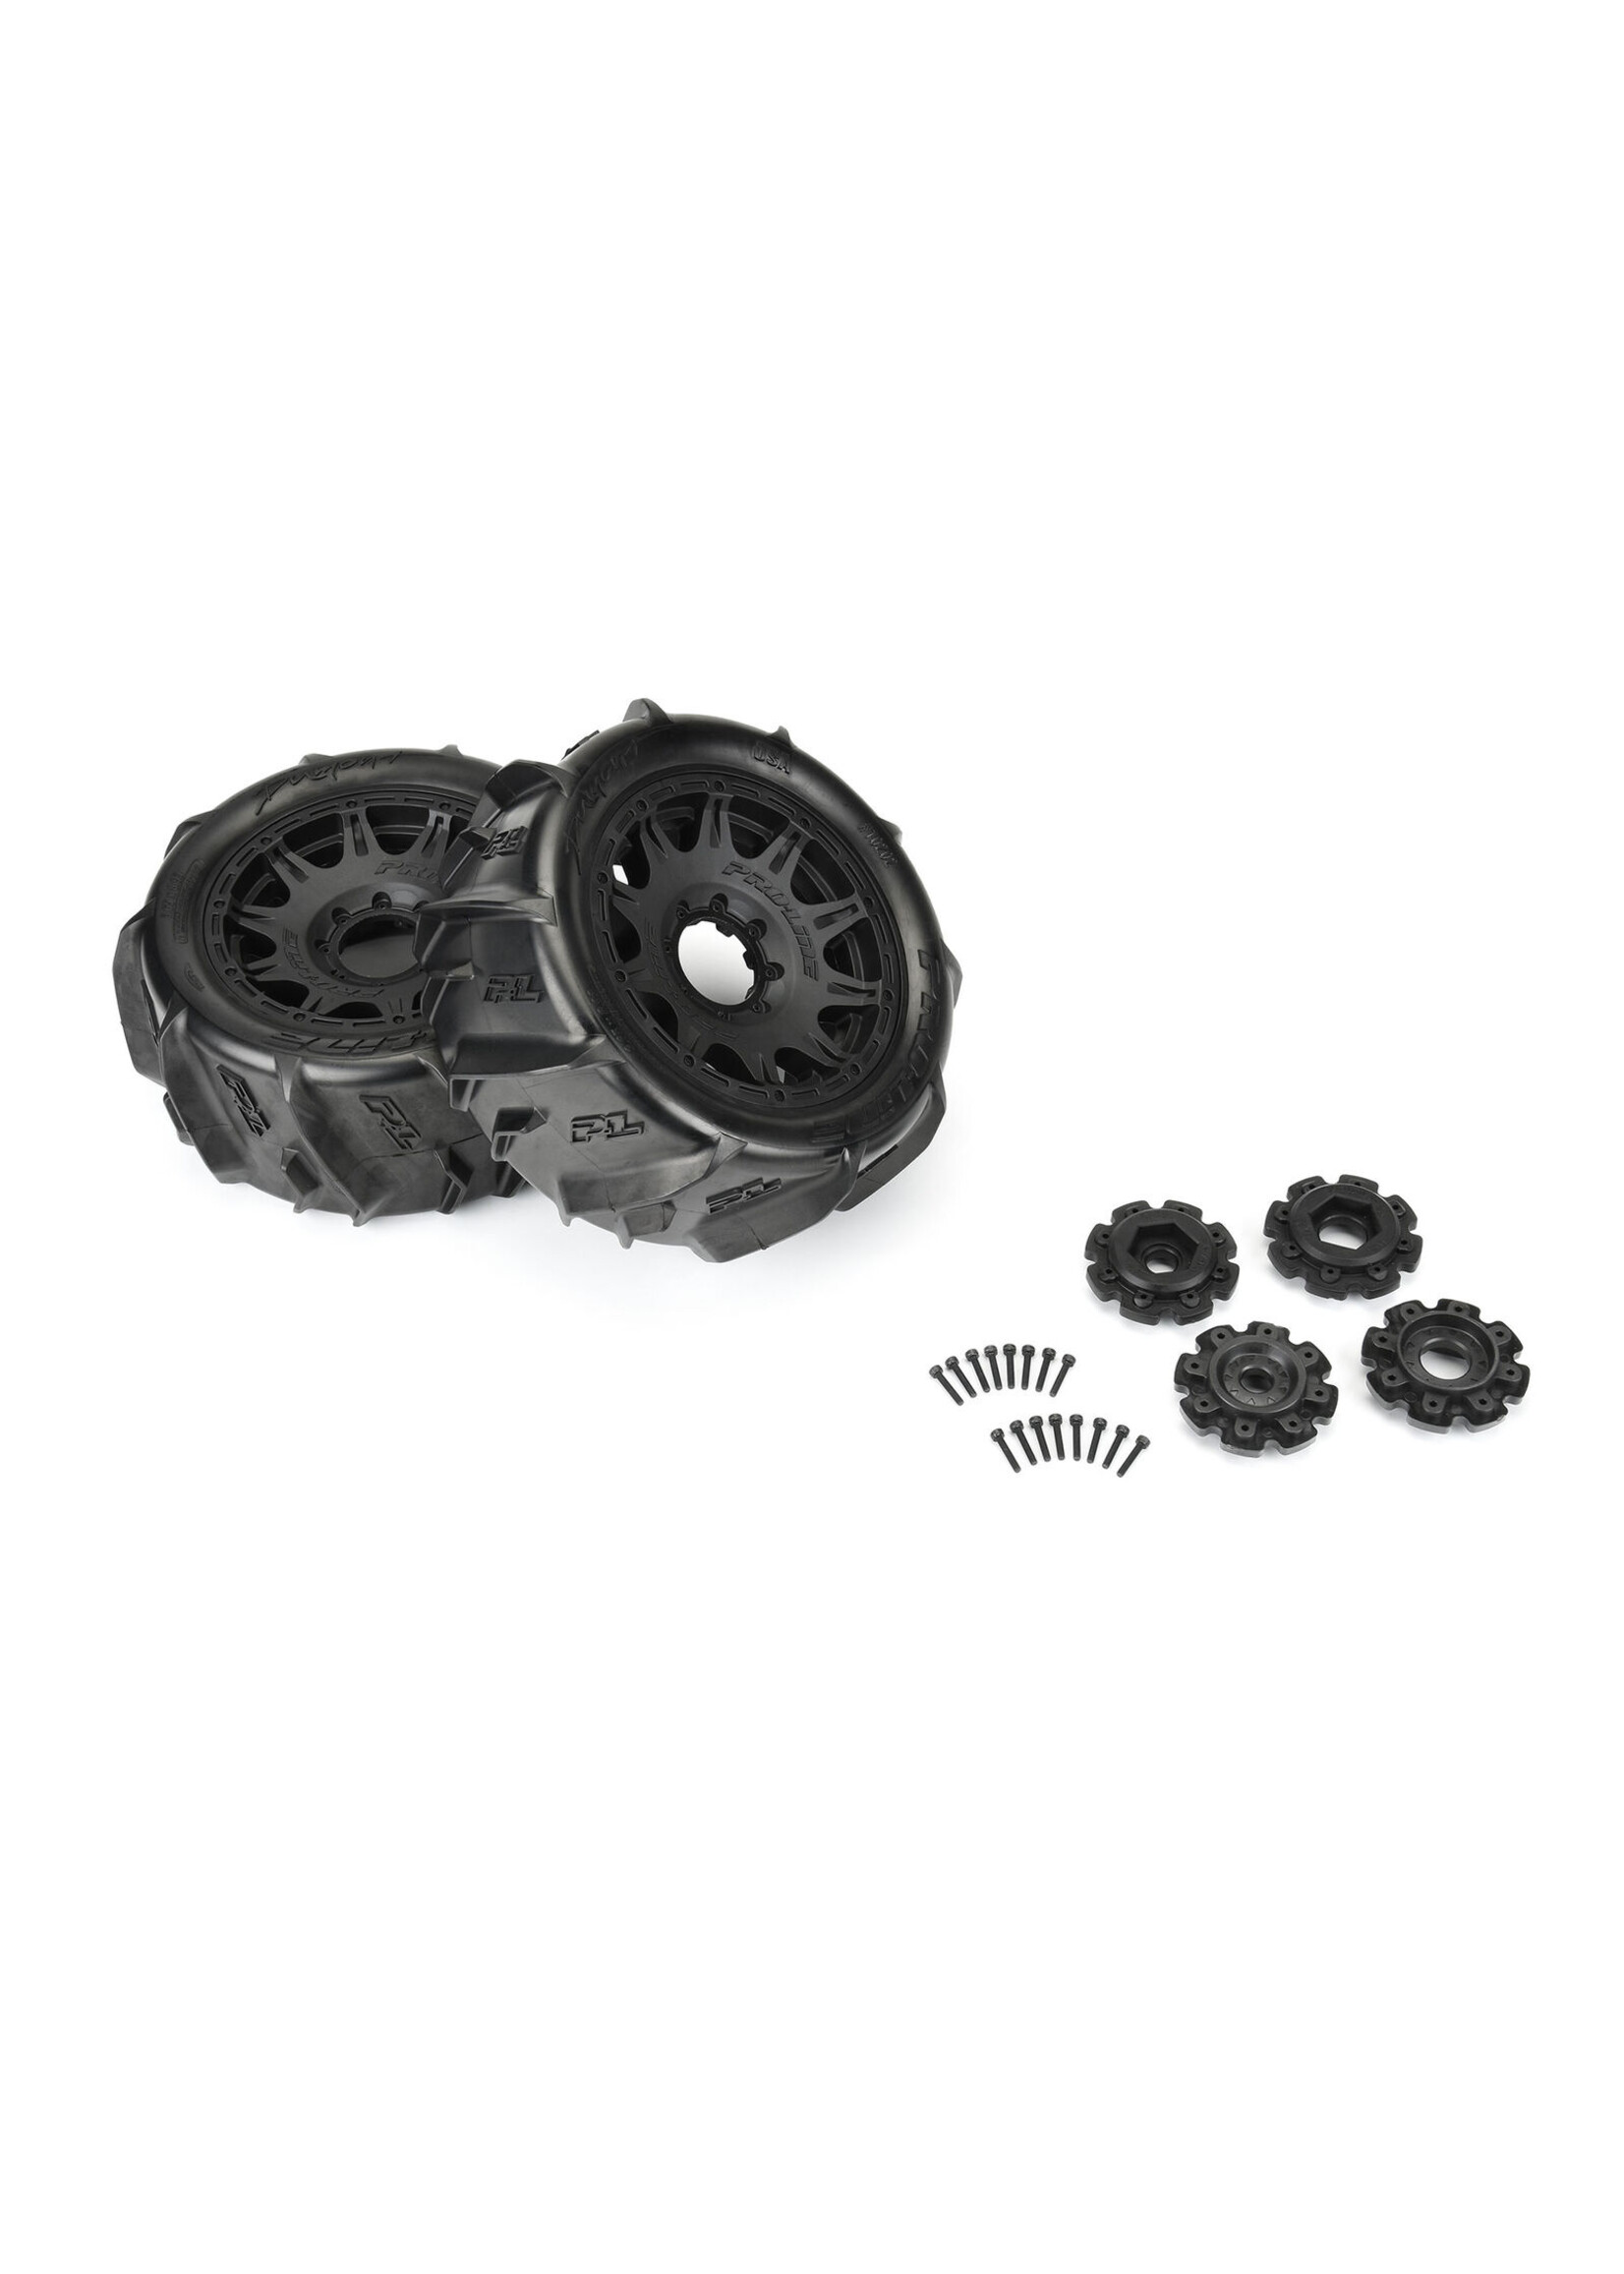 Pro-Line PRO1020211 - Dumont Sand/Snow 5.7”  Mounted Tires, Front & Rear - 24mm